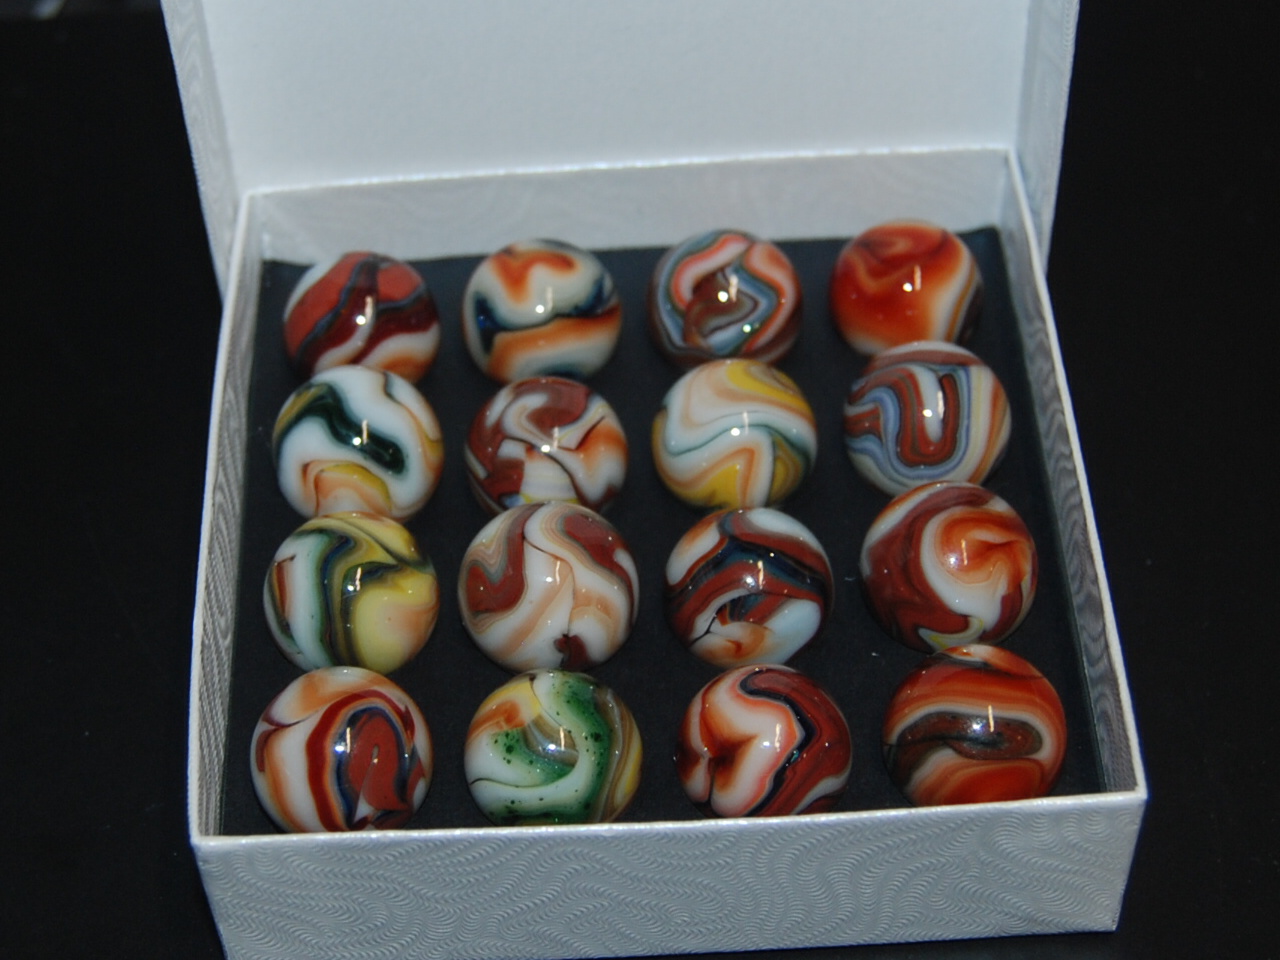 631 SIX PACK Jabo Classic Marbles Collector Set  HTF Marble Lot KEEPERS L 